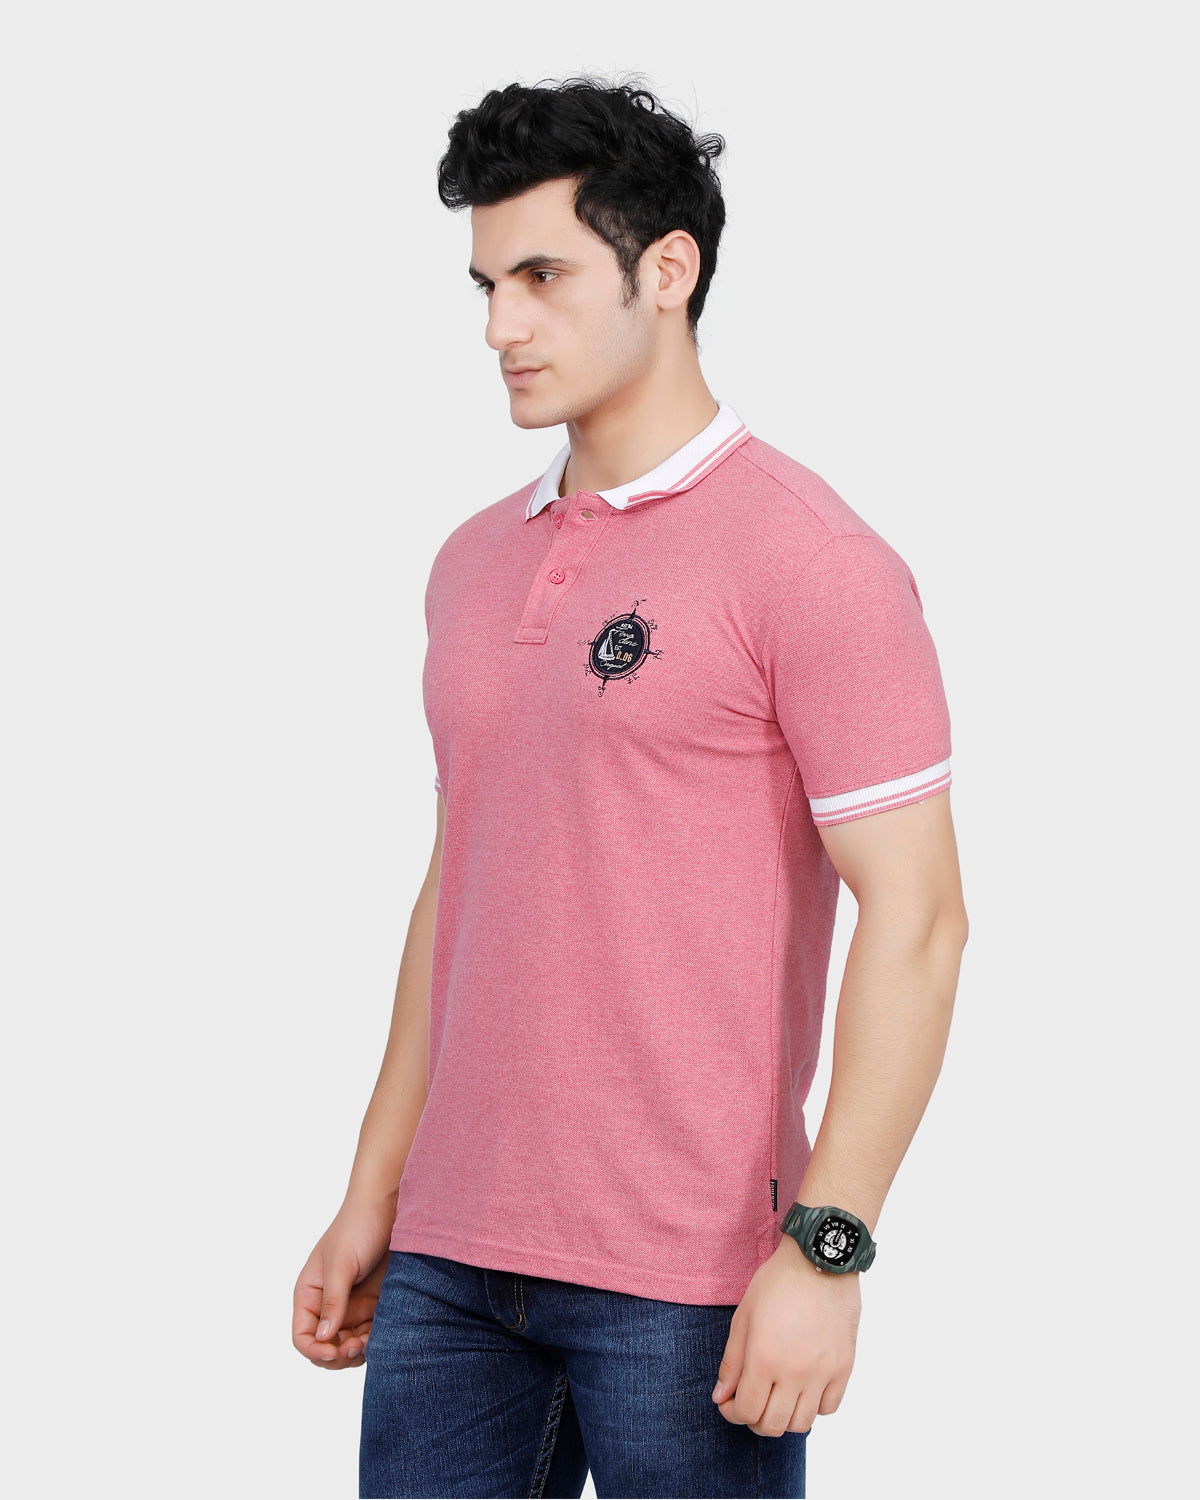 Men's Light Pink Solid Cotton Polo Shirt